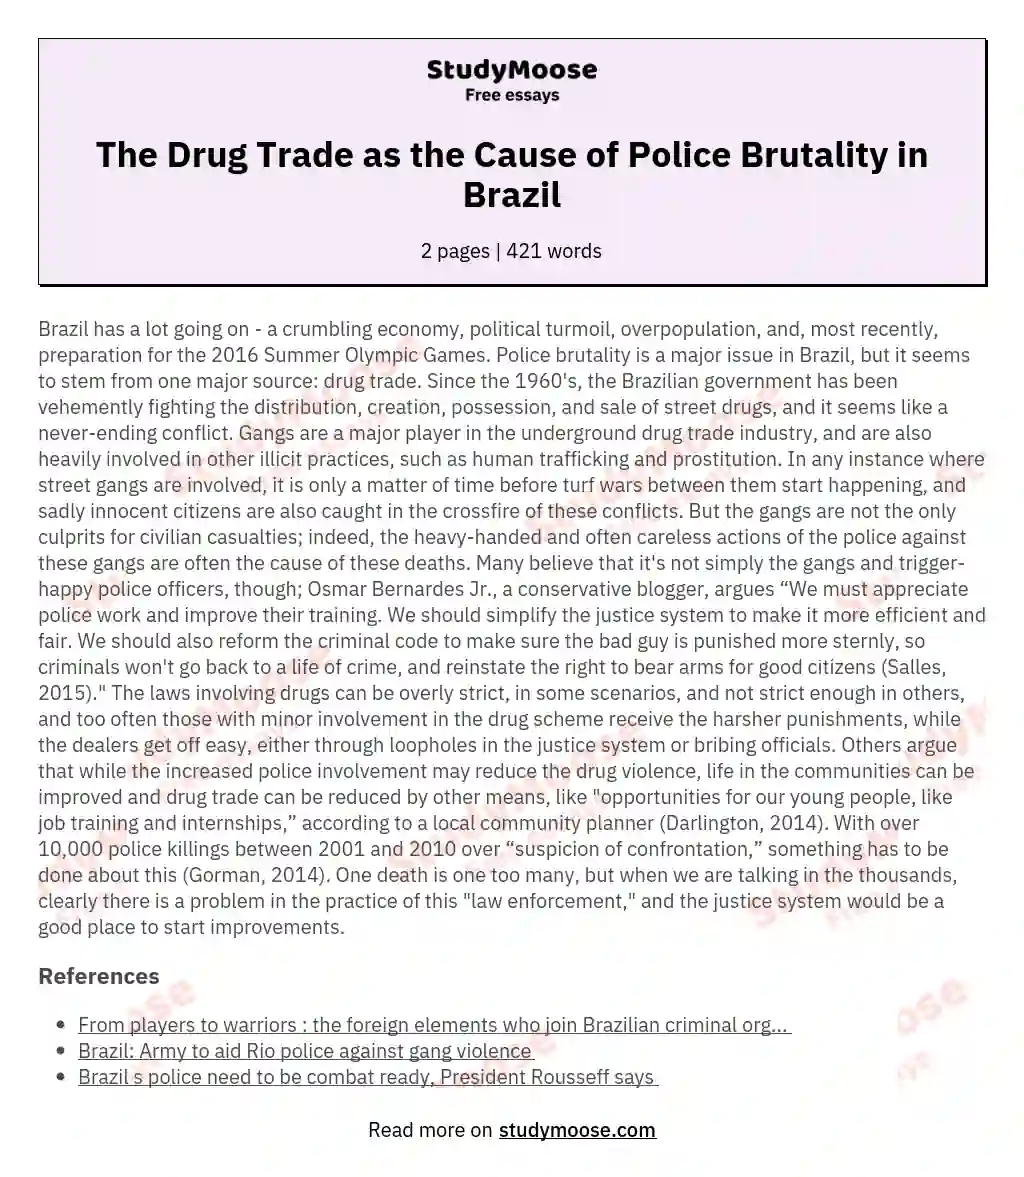 The Drug Trade as the Cause of Police Brutality in Brazil essay